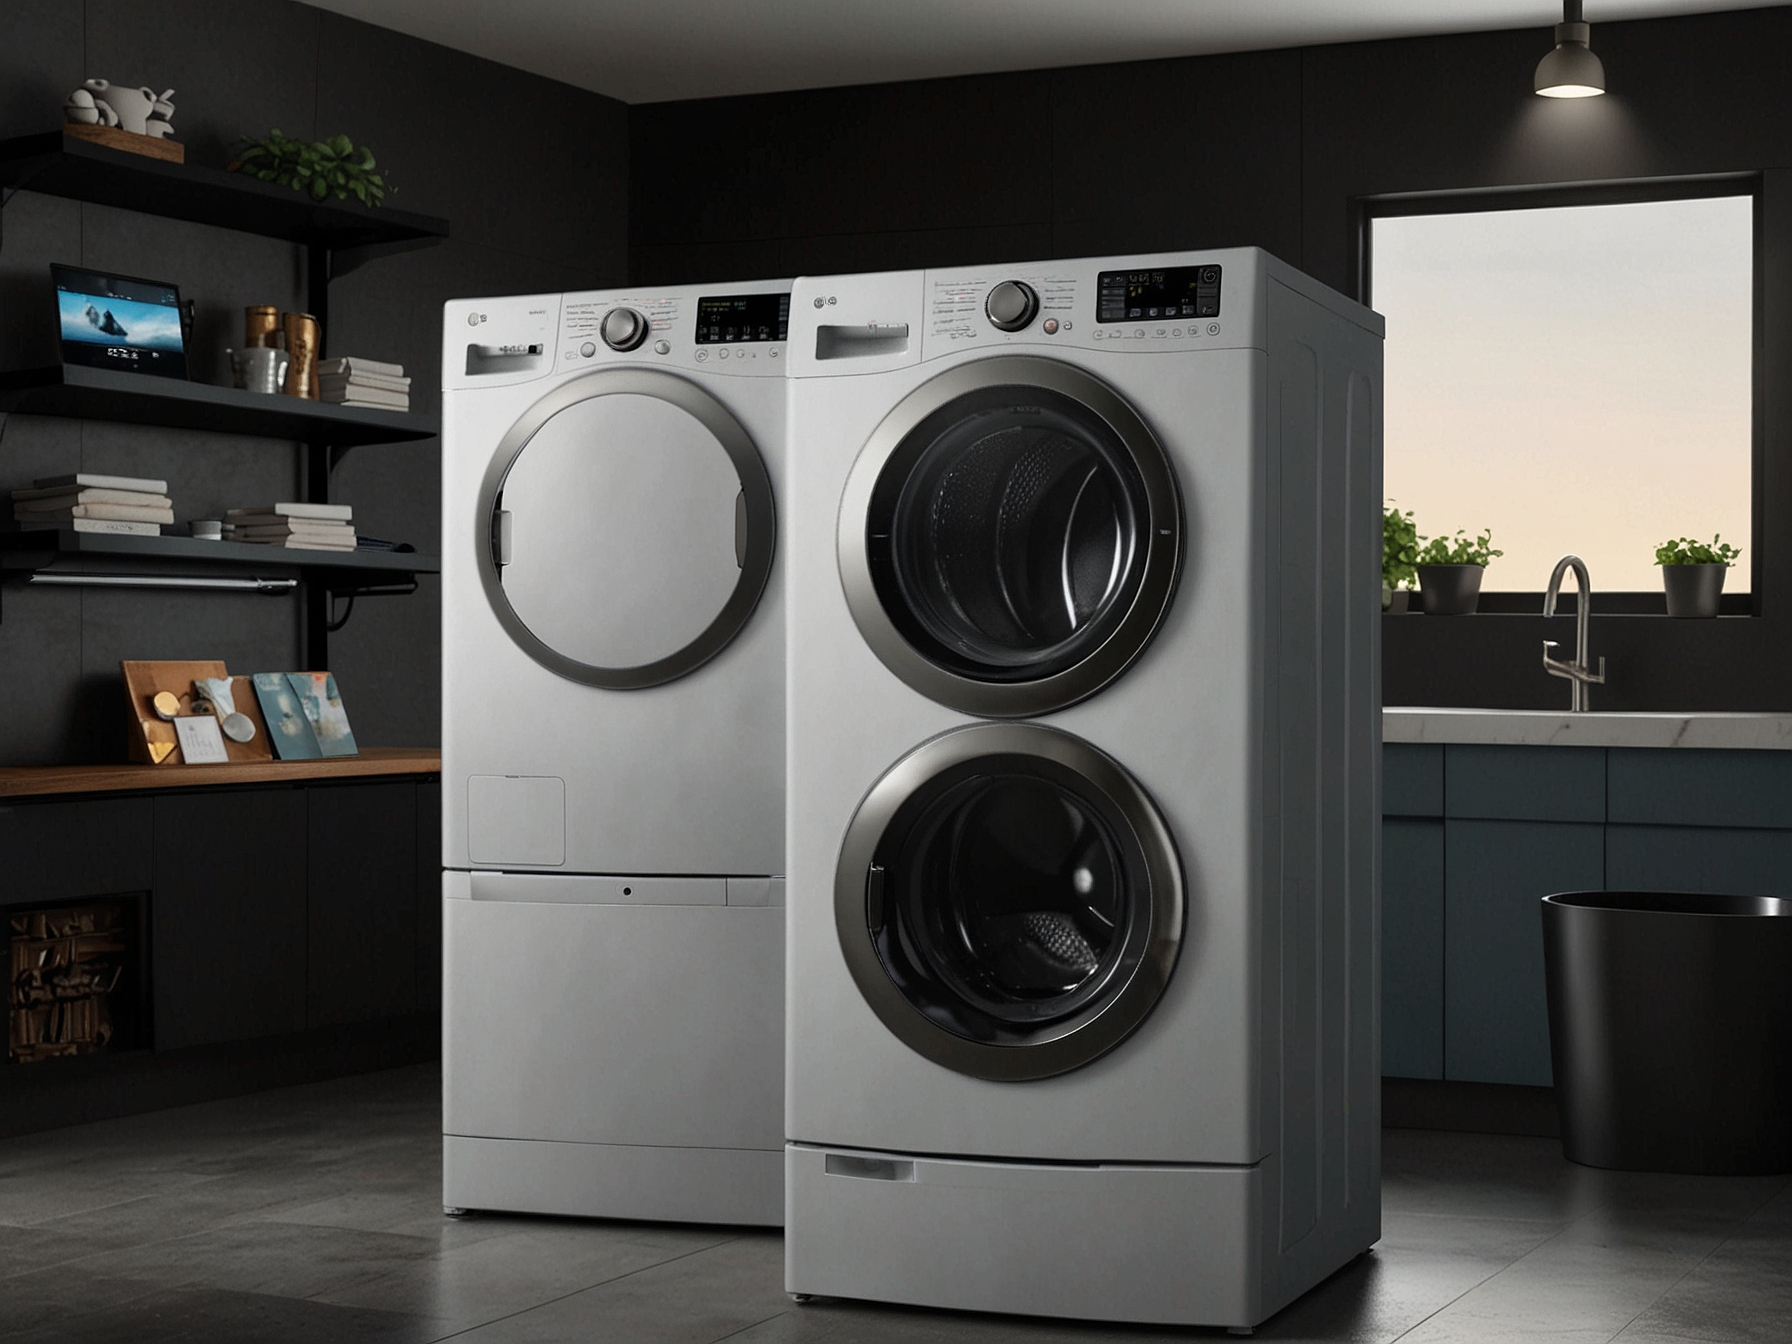 An image of an LG washer and dryer bundle featured at Best Buy, showcasing the sleek design and advanced features such as TurboWash technology and Wi-Fi connectivity for convenient management.